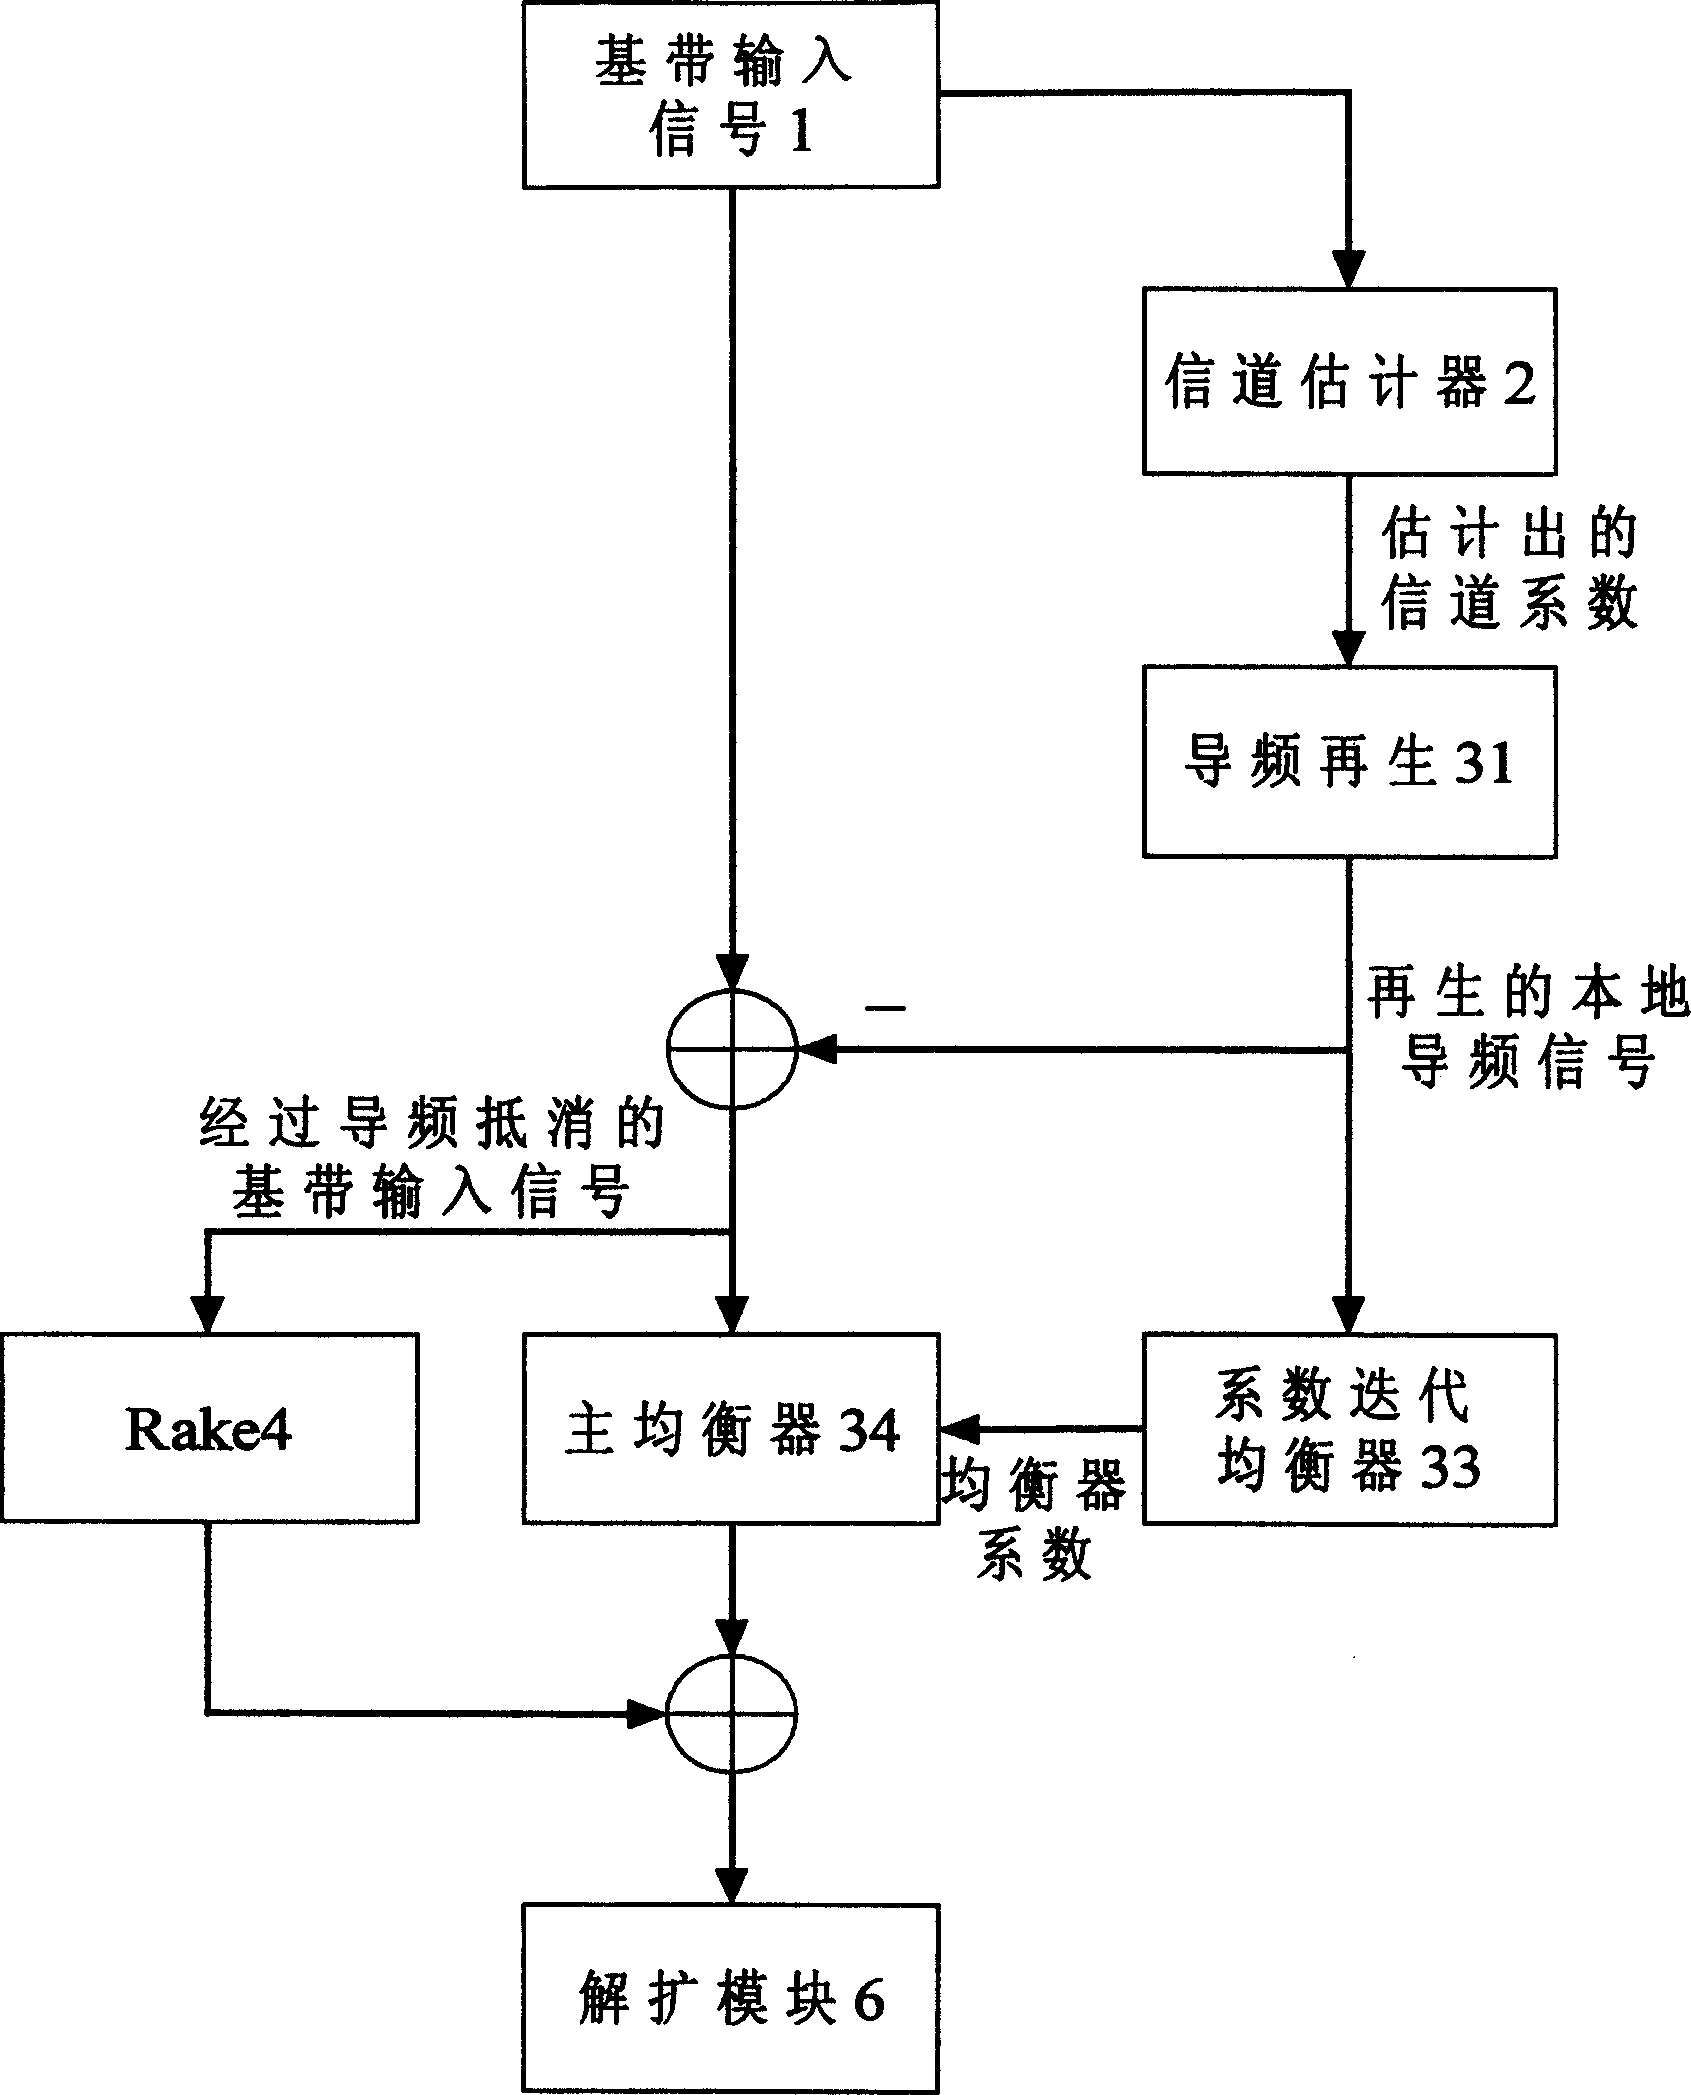 Parallelling receiving method by chip balancer and rake receiver